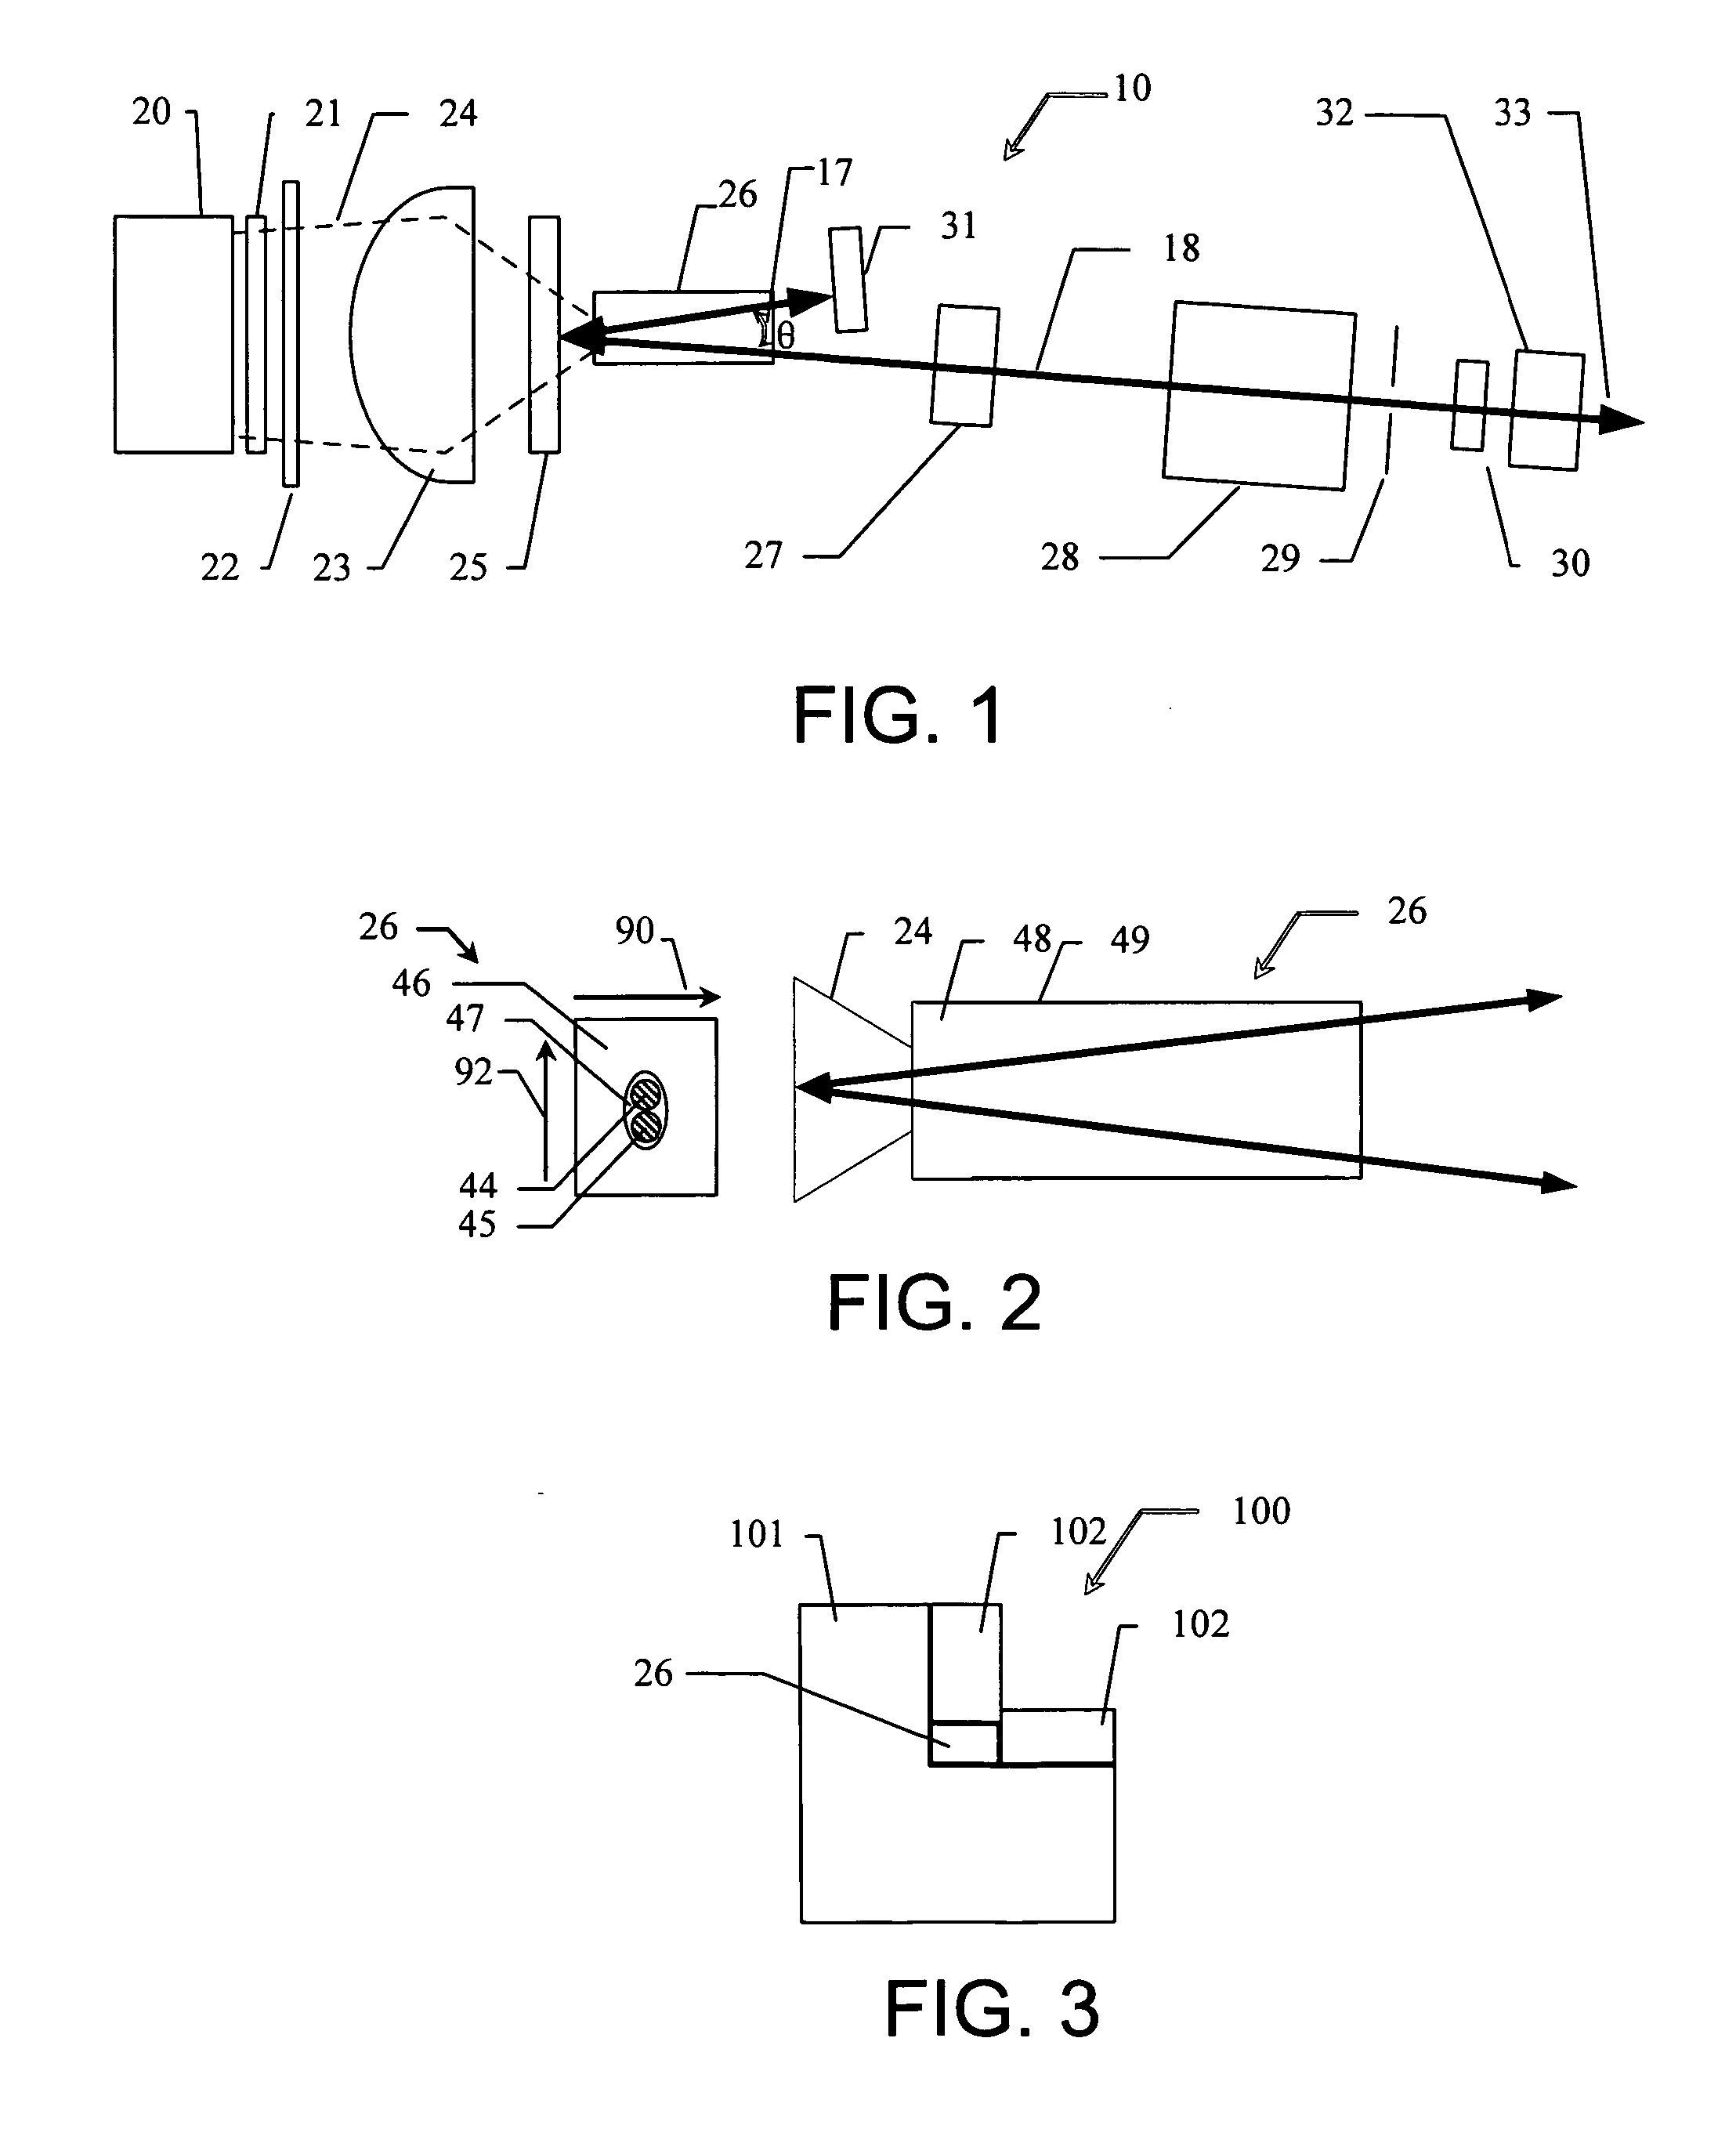 Longitudinally pumped solid state laser and methods of making and using